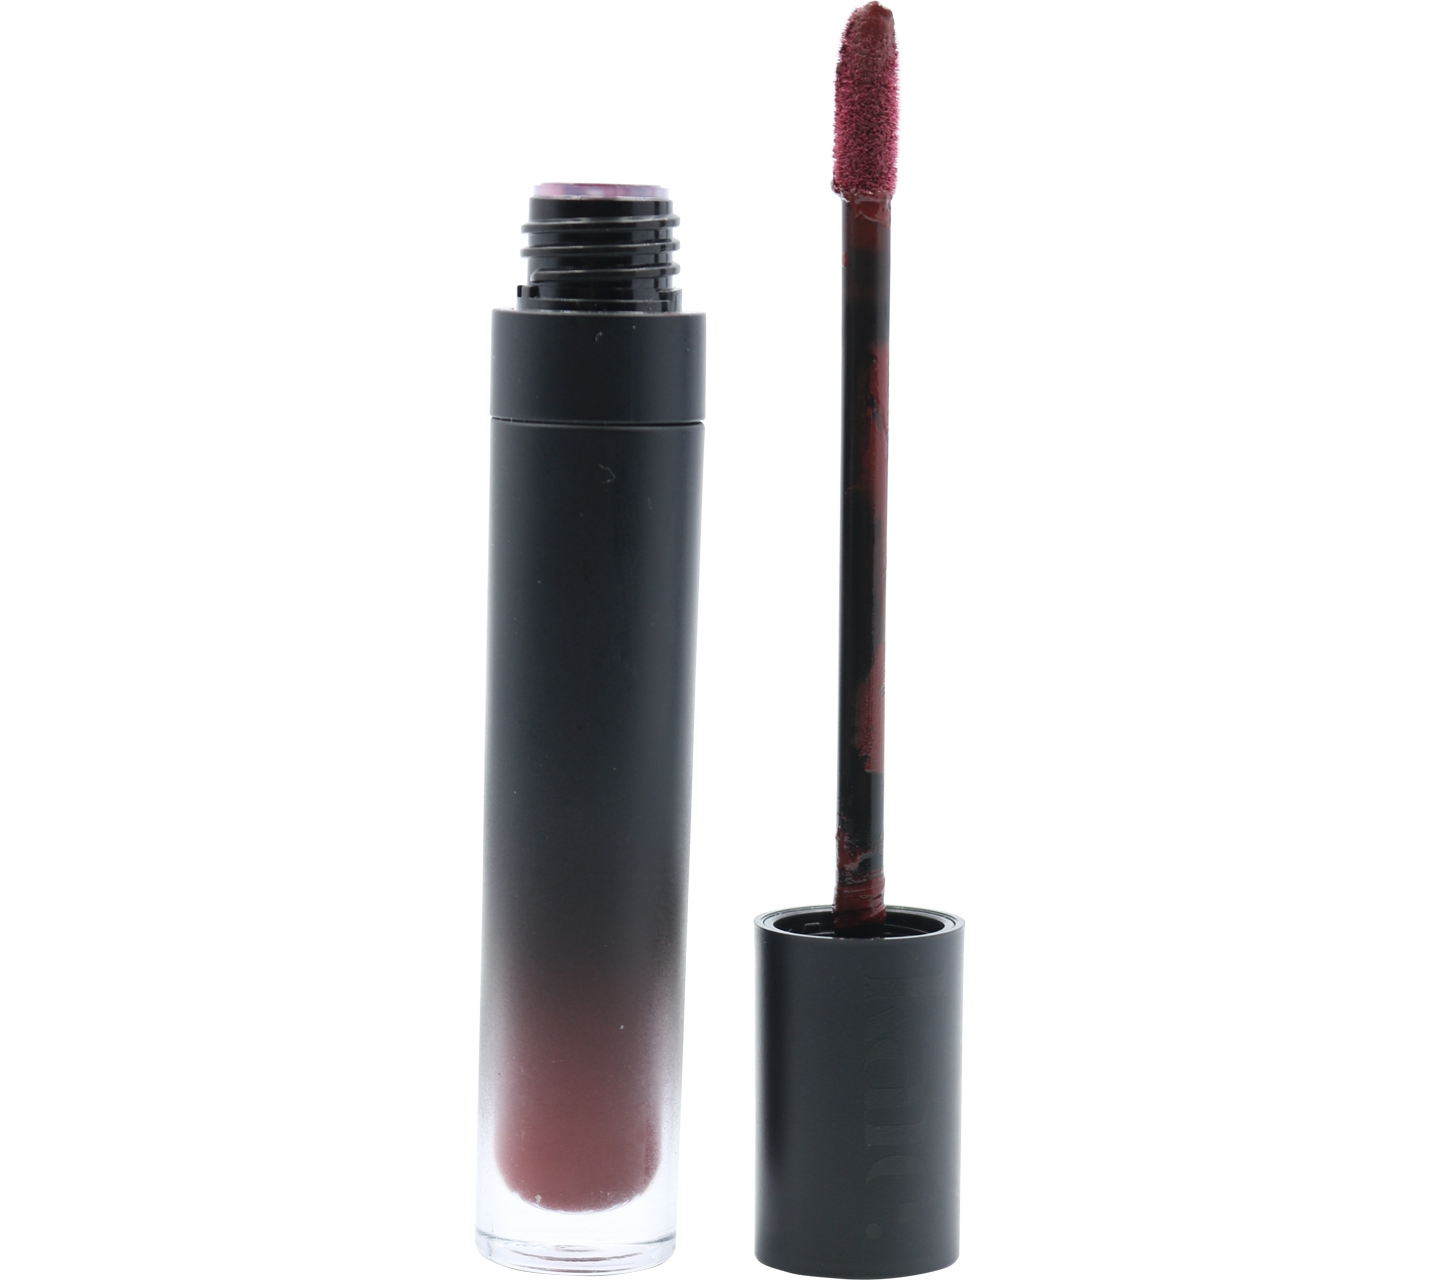 Kaie Lip Mousse No 03 Lips